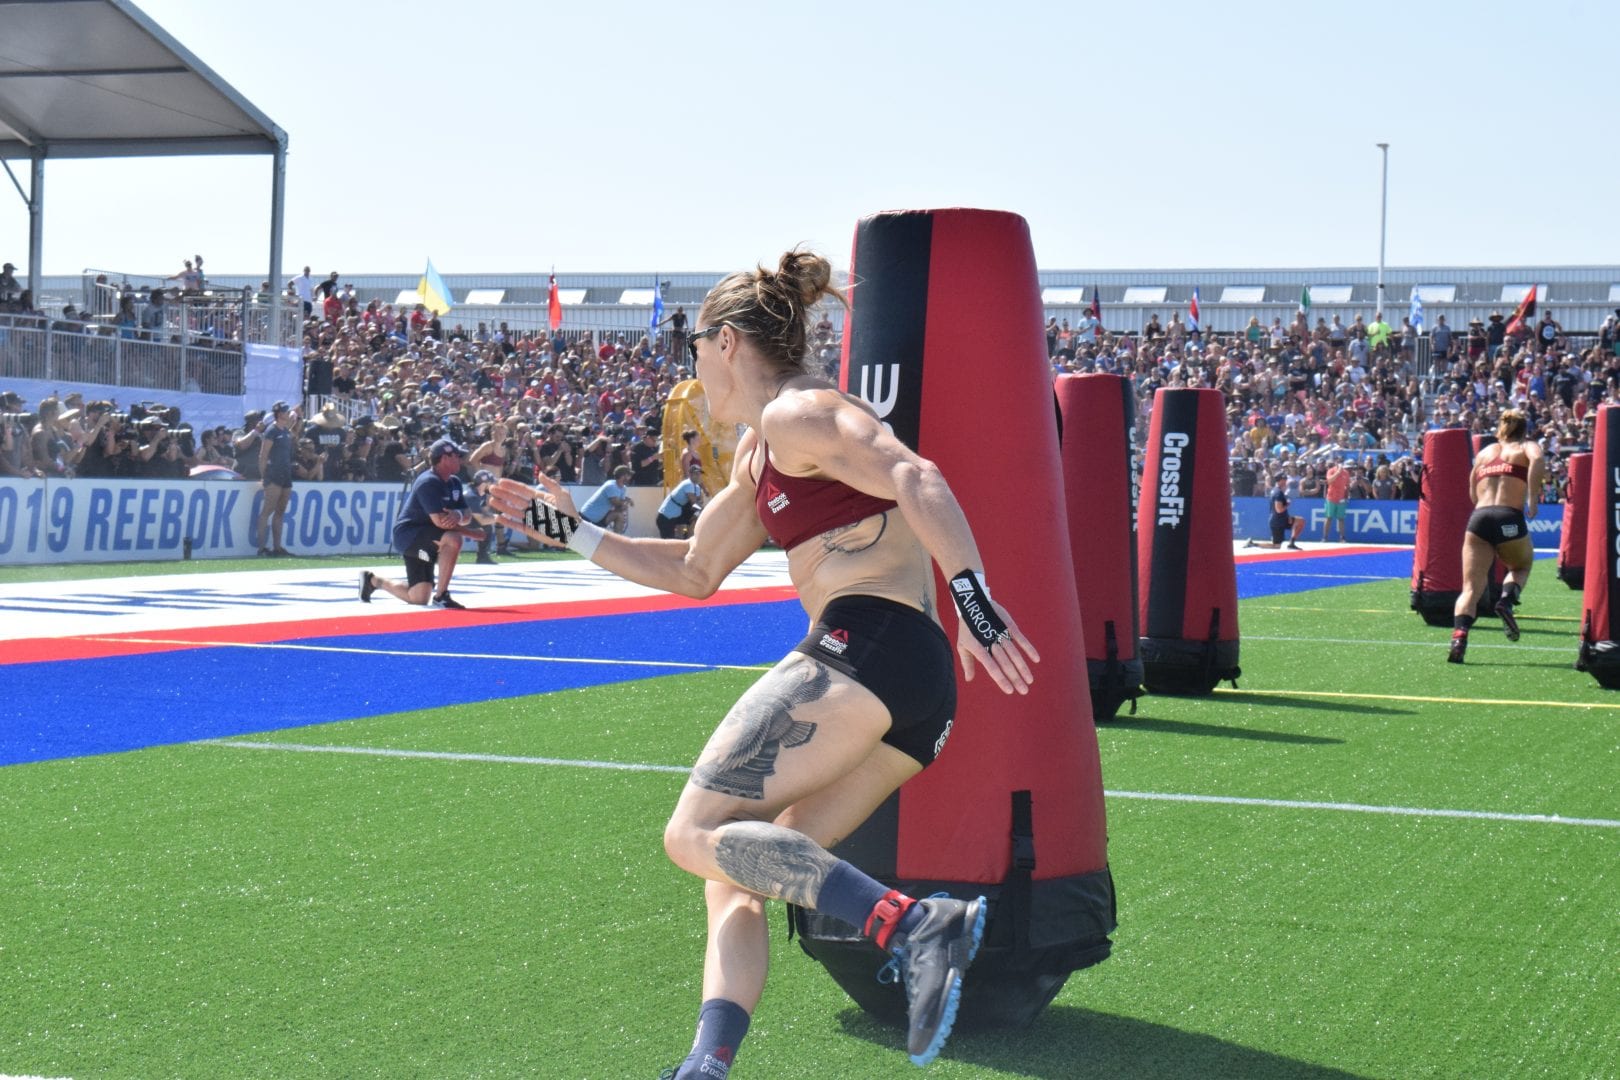 013 - Sam Briggs of the United Kingdom races in a heat of the Sprint event at the 2019 CrossFit Games2